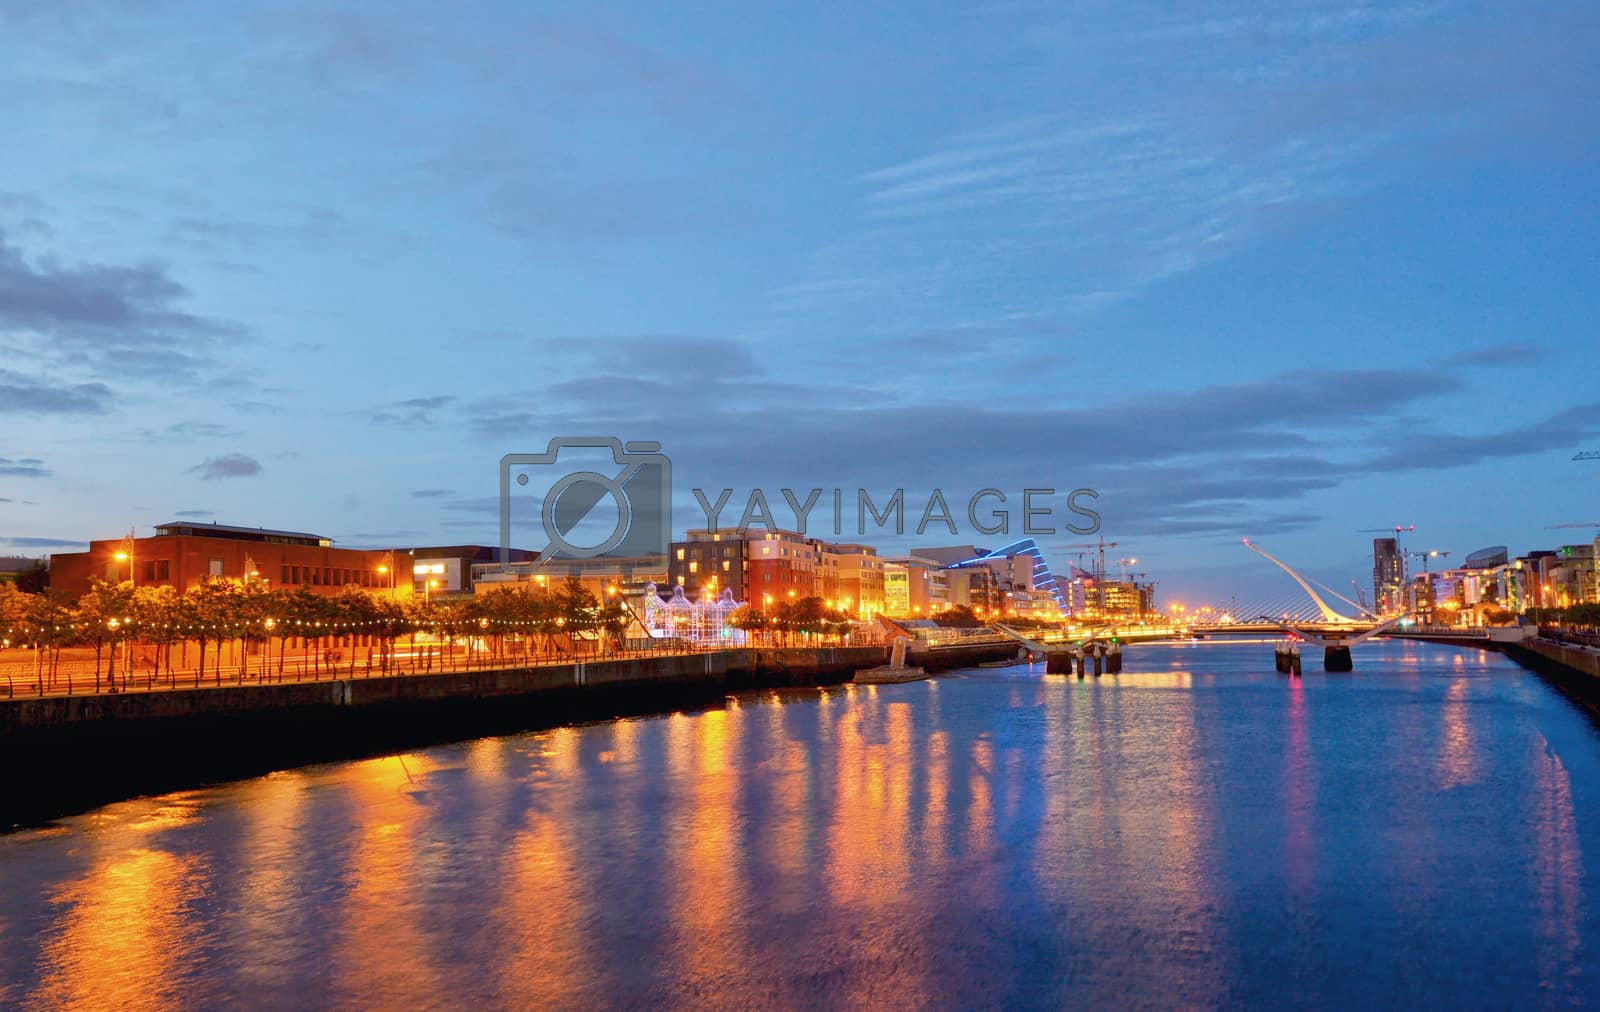 Royalty free image of Samuel Beckett Bridge and the river Liffey in Dublin by mady70